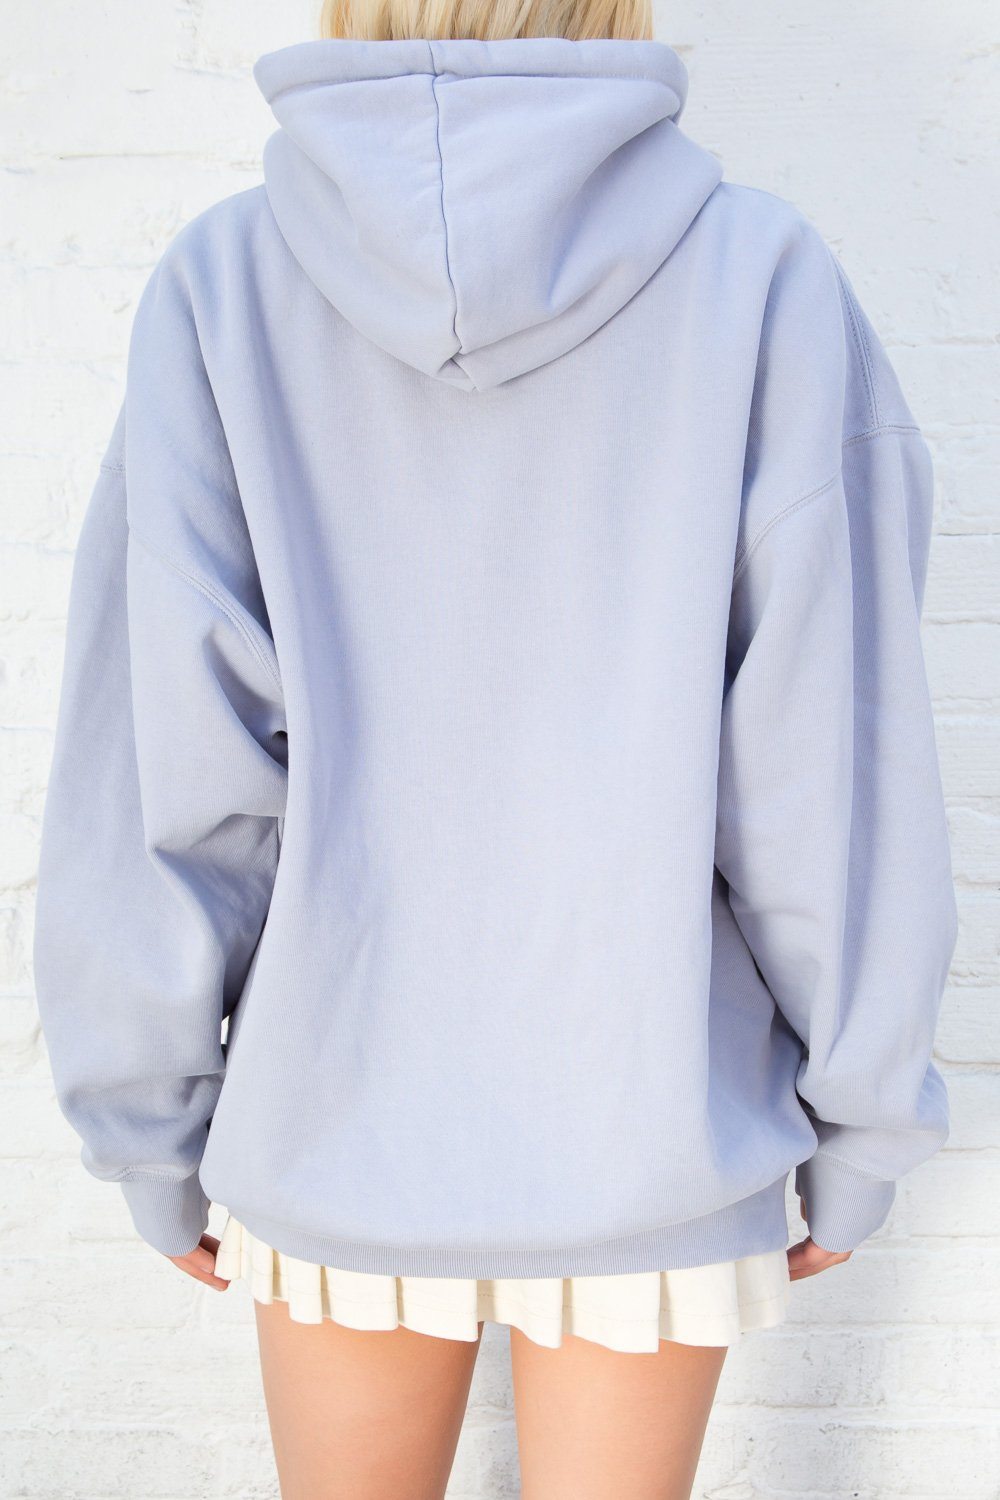 brandy melville christy hoodie for Sale in Los Angeles, CA - OfferUp